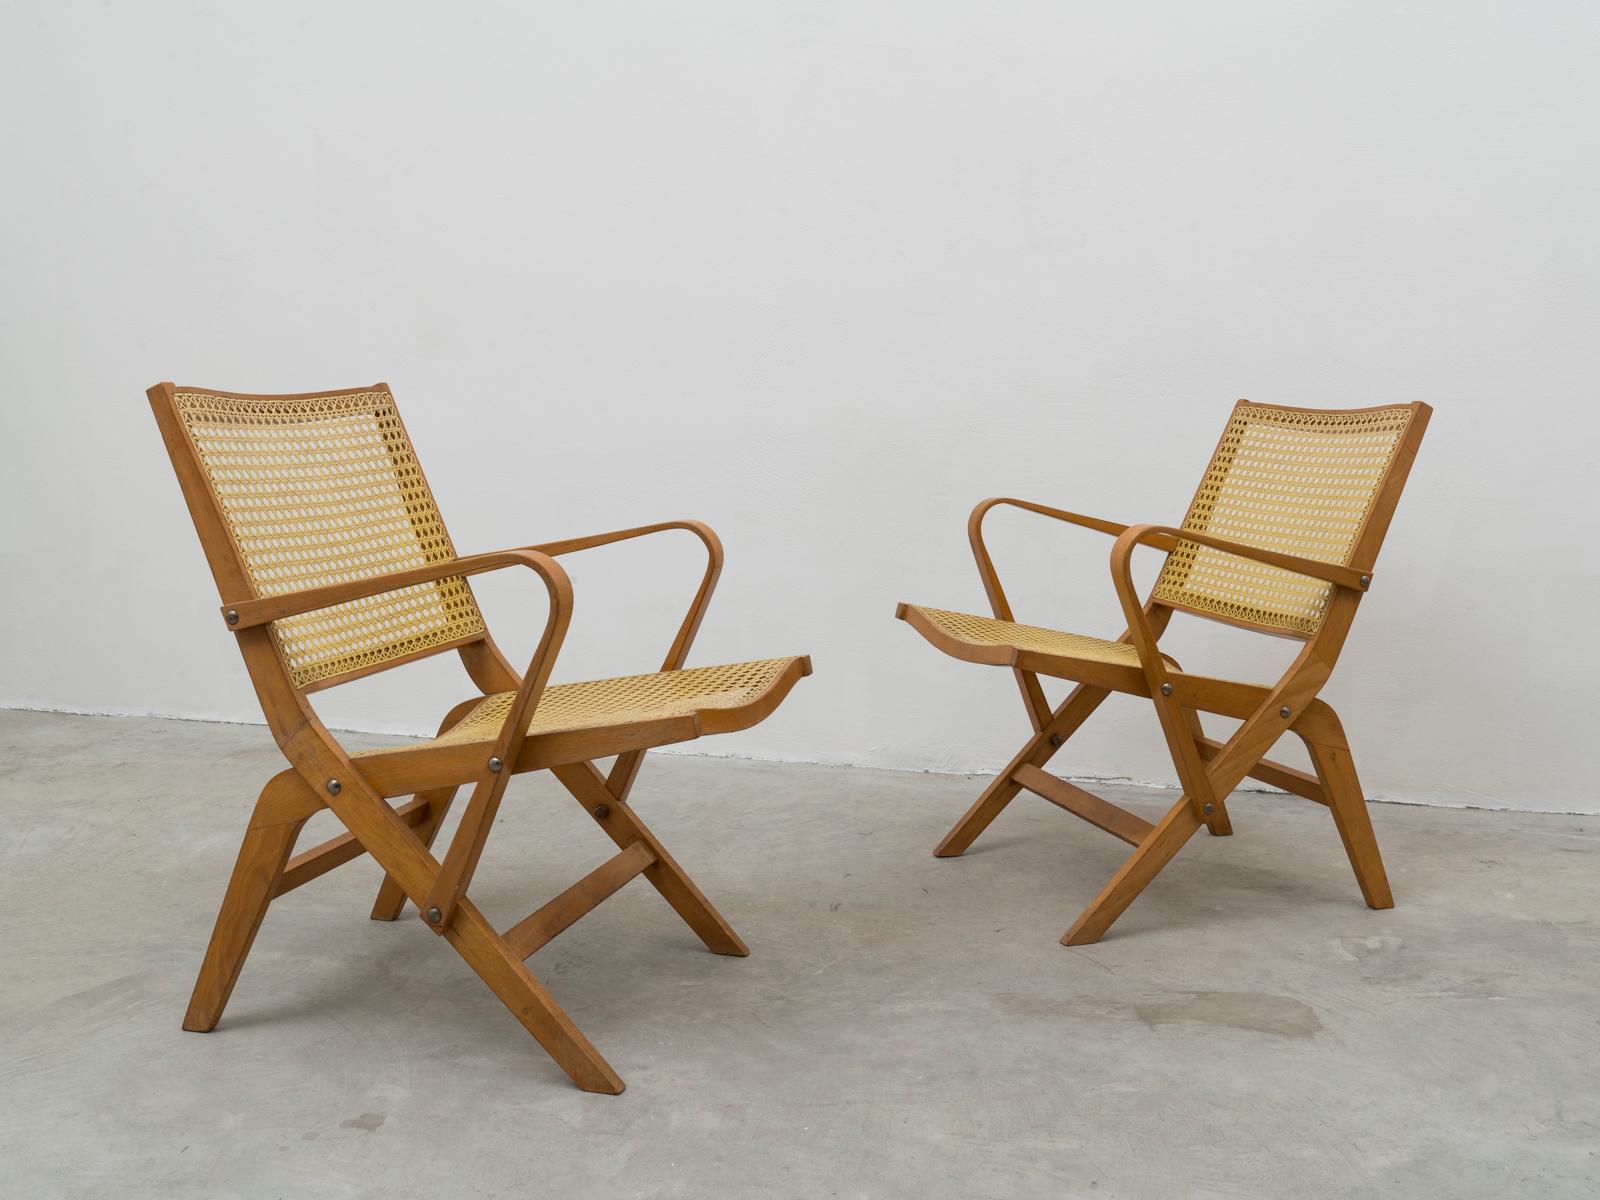 Extremely rare pair of armchairs design by Slovenian architect and designer Niko Kralj. This armchair, mod. 100, were produced only as prototype and never make it to production, because their crafting was too complicated and expensive. They are